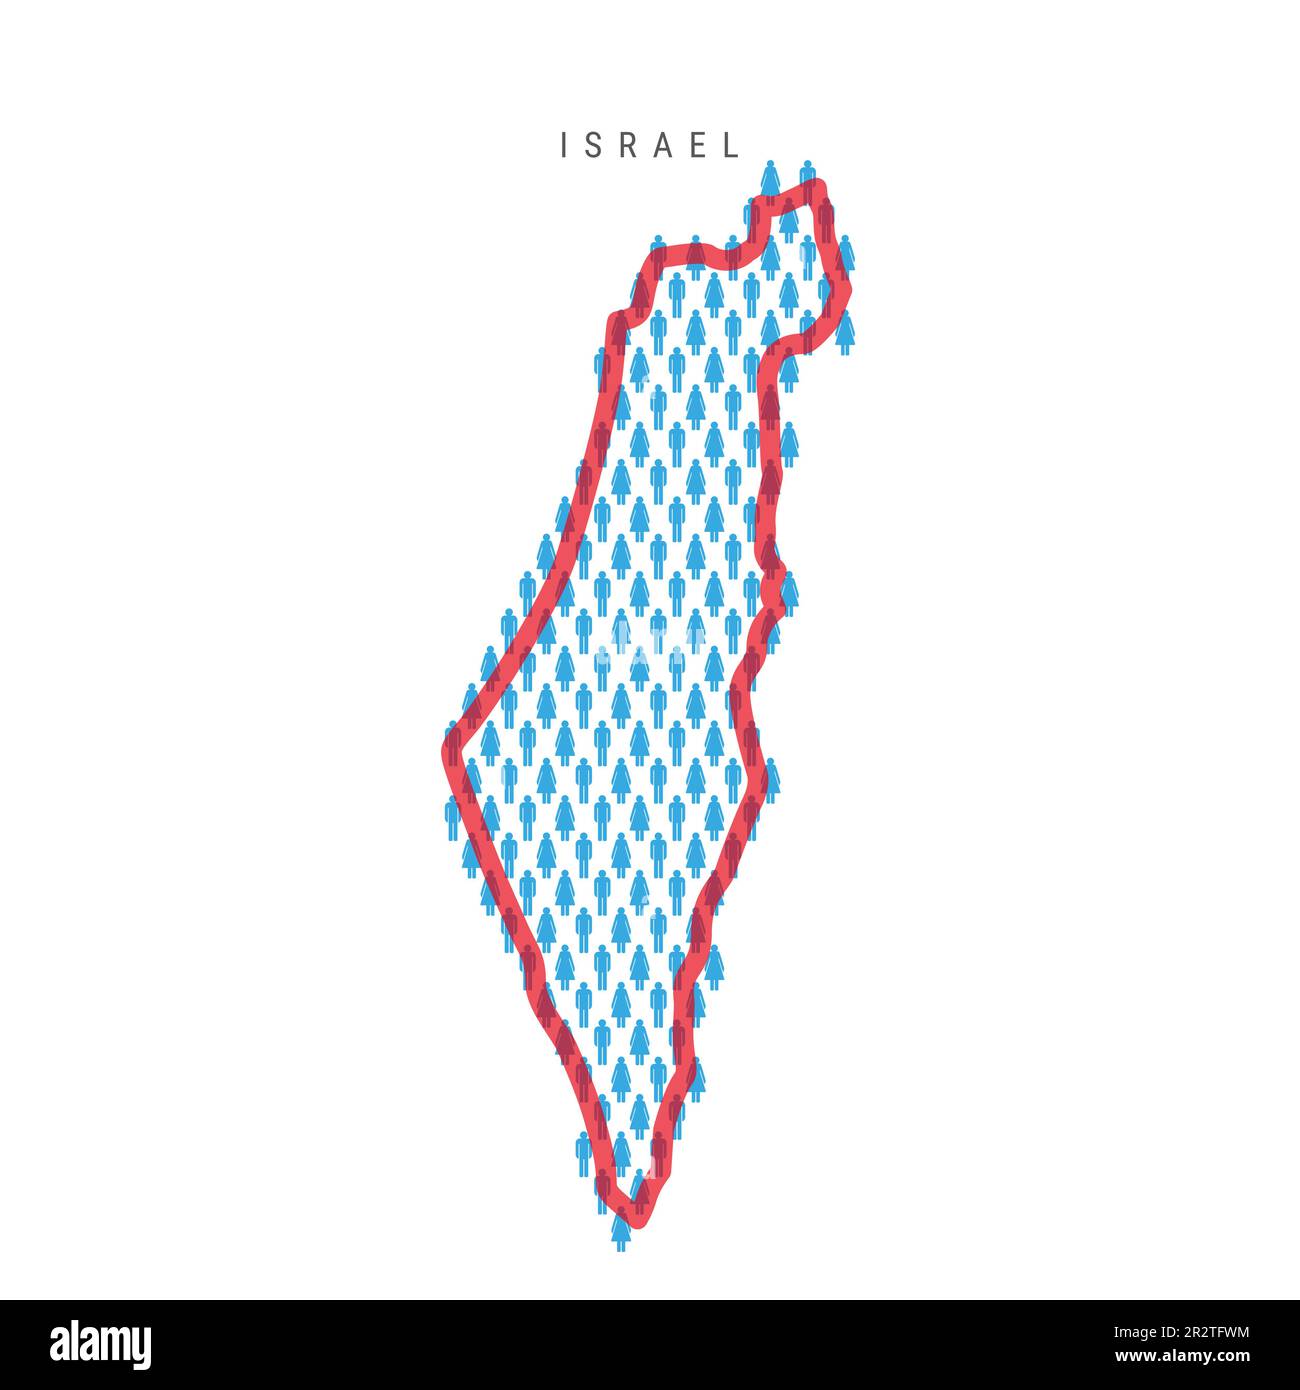 Israel population map. Stick figures Israeli people map with bold red translucent country border. Pattern of men and women icons. Isolated vector illu Stock Vector